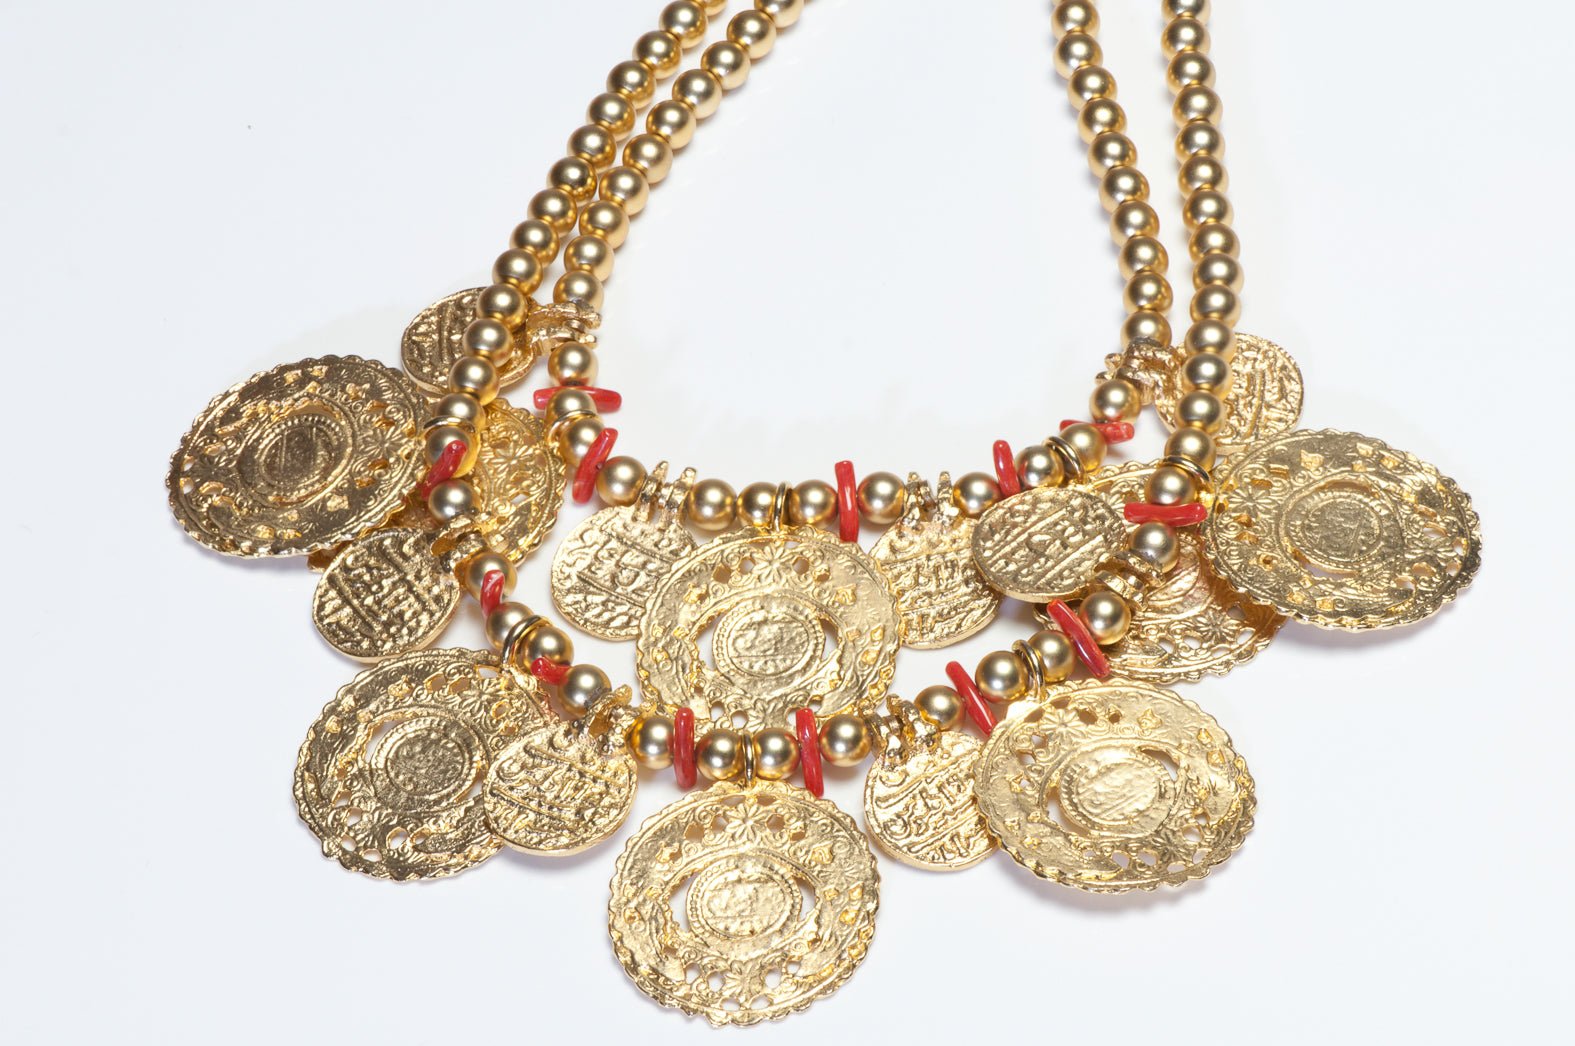 Vintage 1980’s Kenneth Jay Lane KJL Gold Plated Coins Faux Coral Beads Necklace